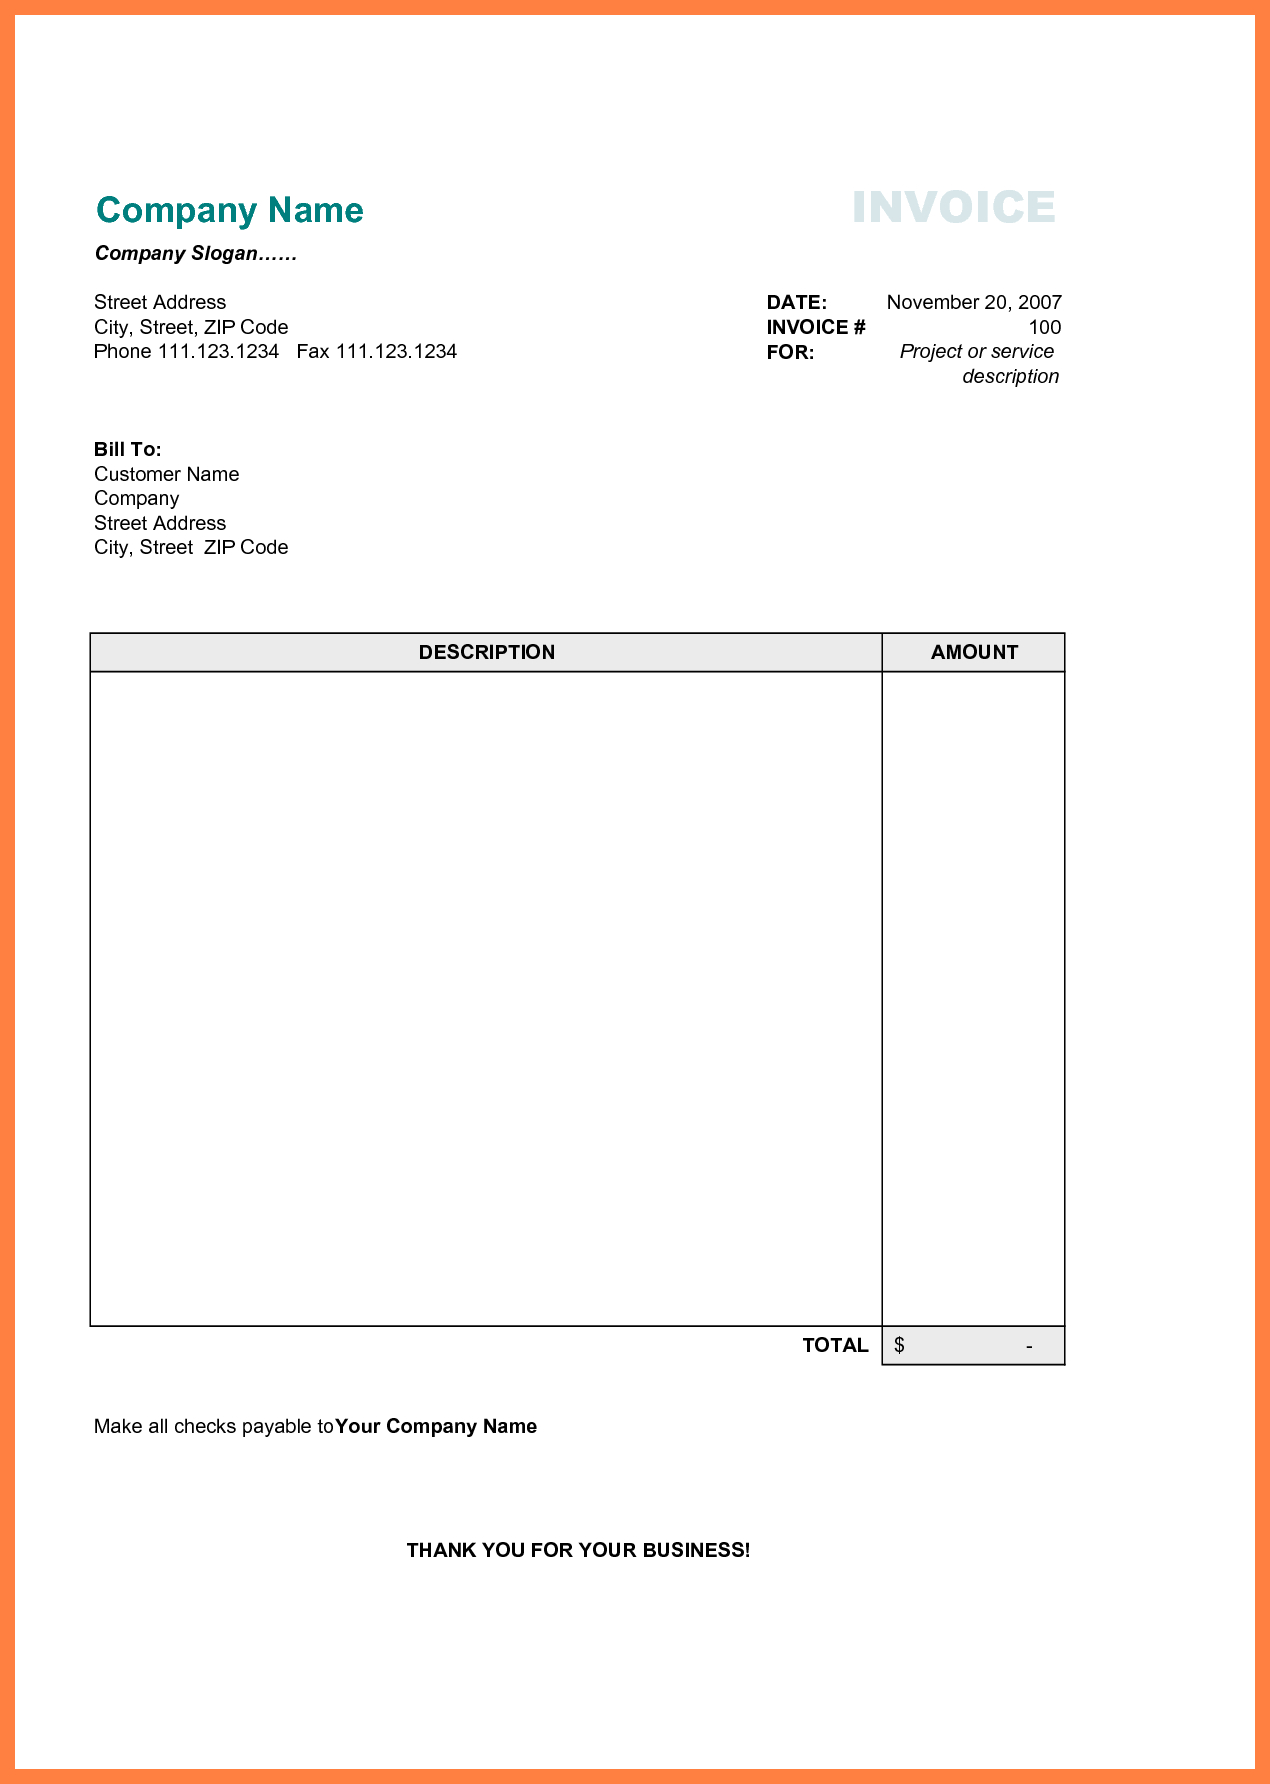 Free Printable Business Invoice Template - Invoice Format In Excel - Free Printable Blank Invoice